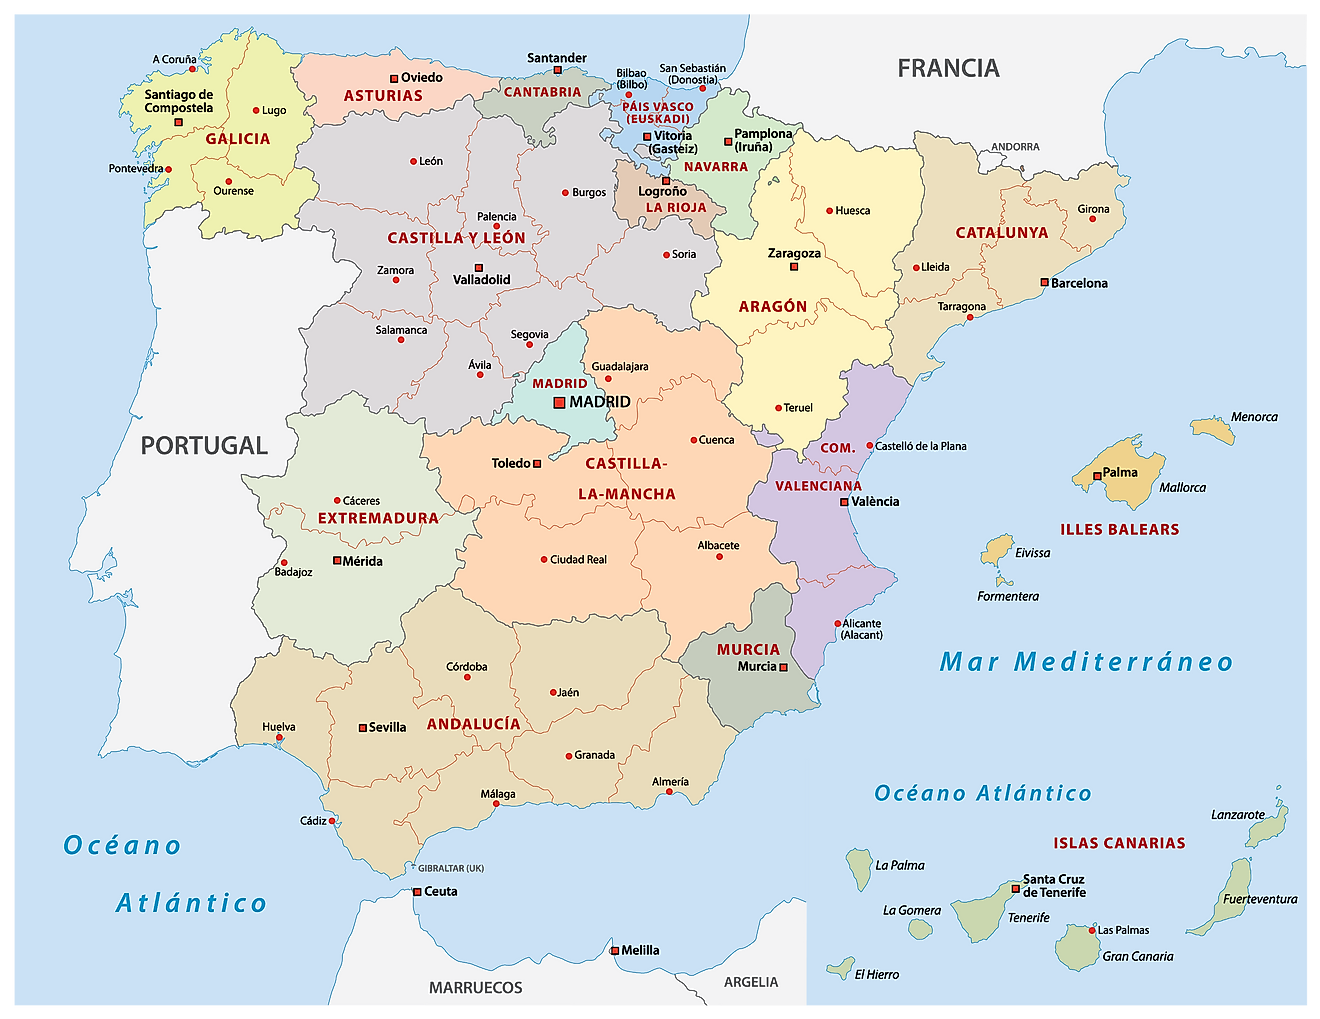 Political Map of Spain showing 17 autonomous communities and the capital city of Madrid.